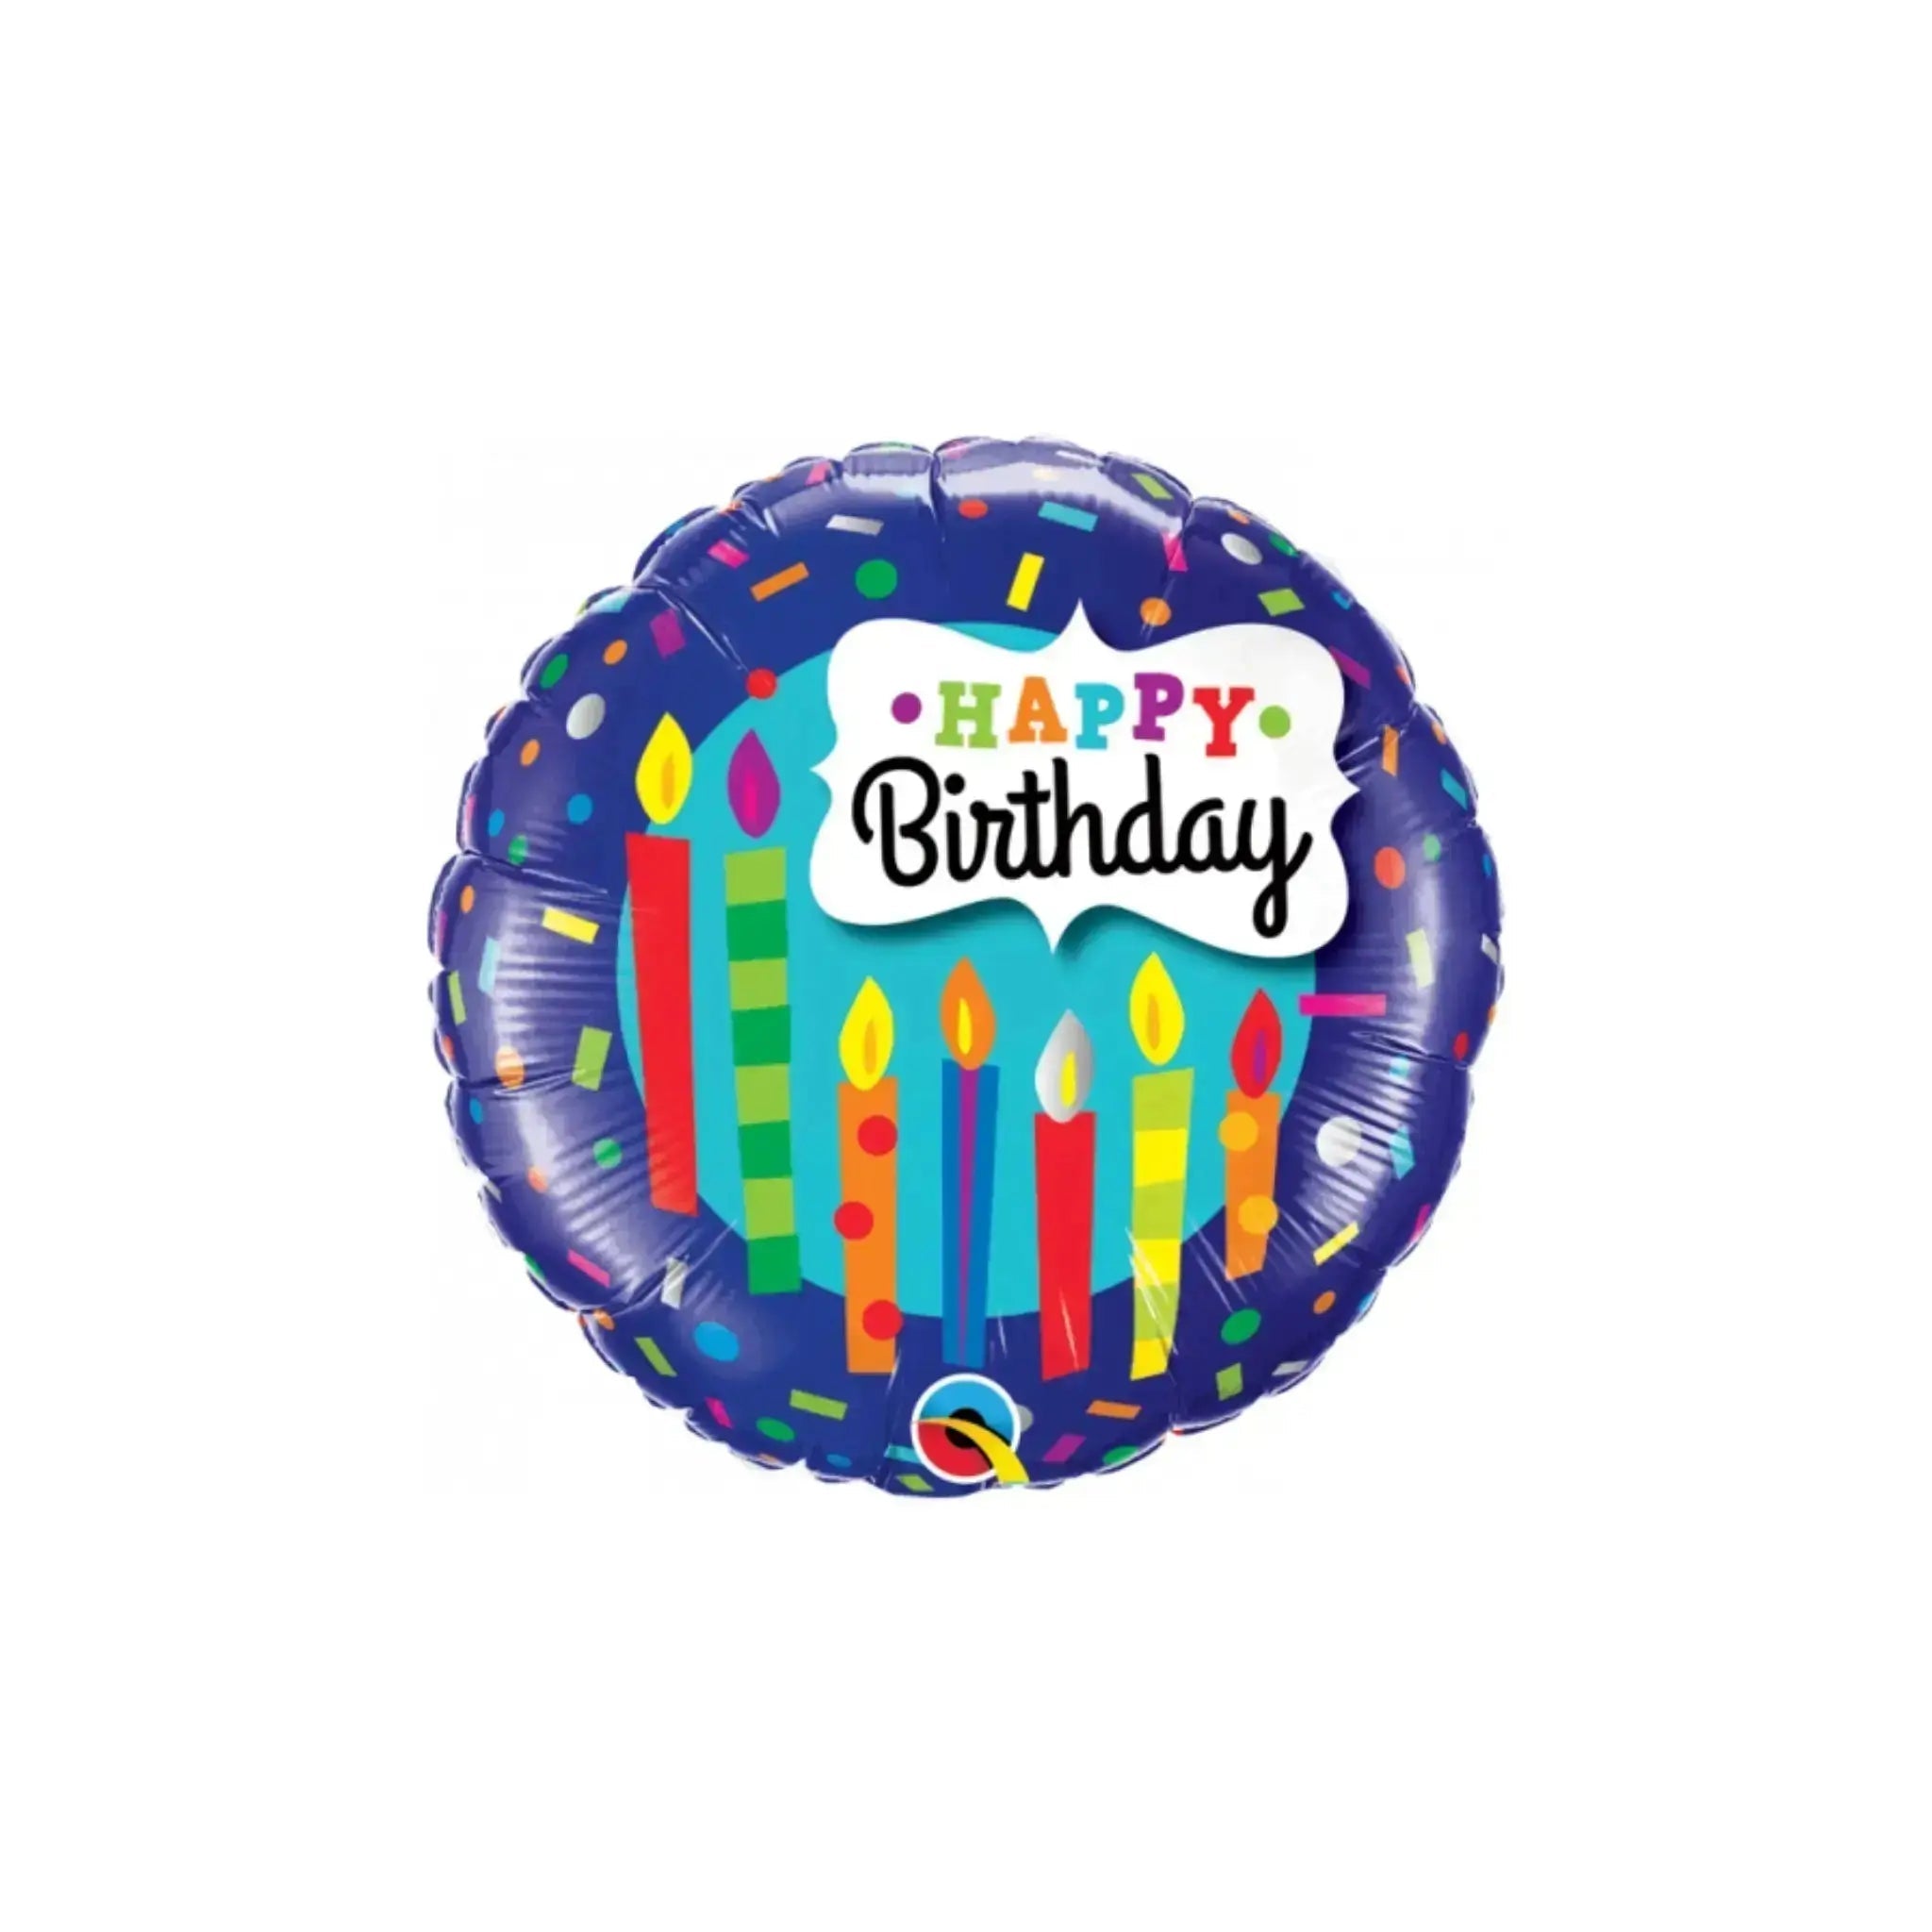 Happy Birthday Candles & Confetti Balloon | The Party Hut